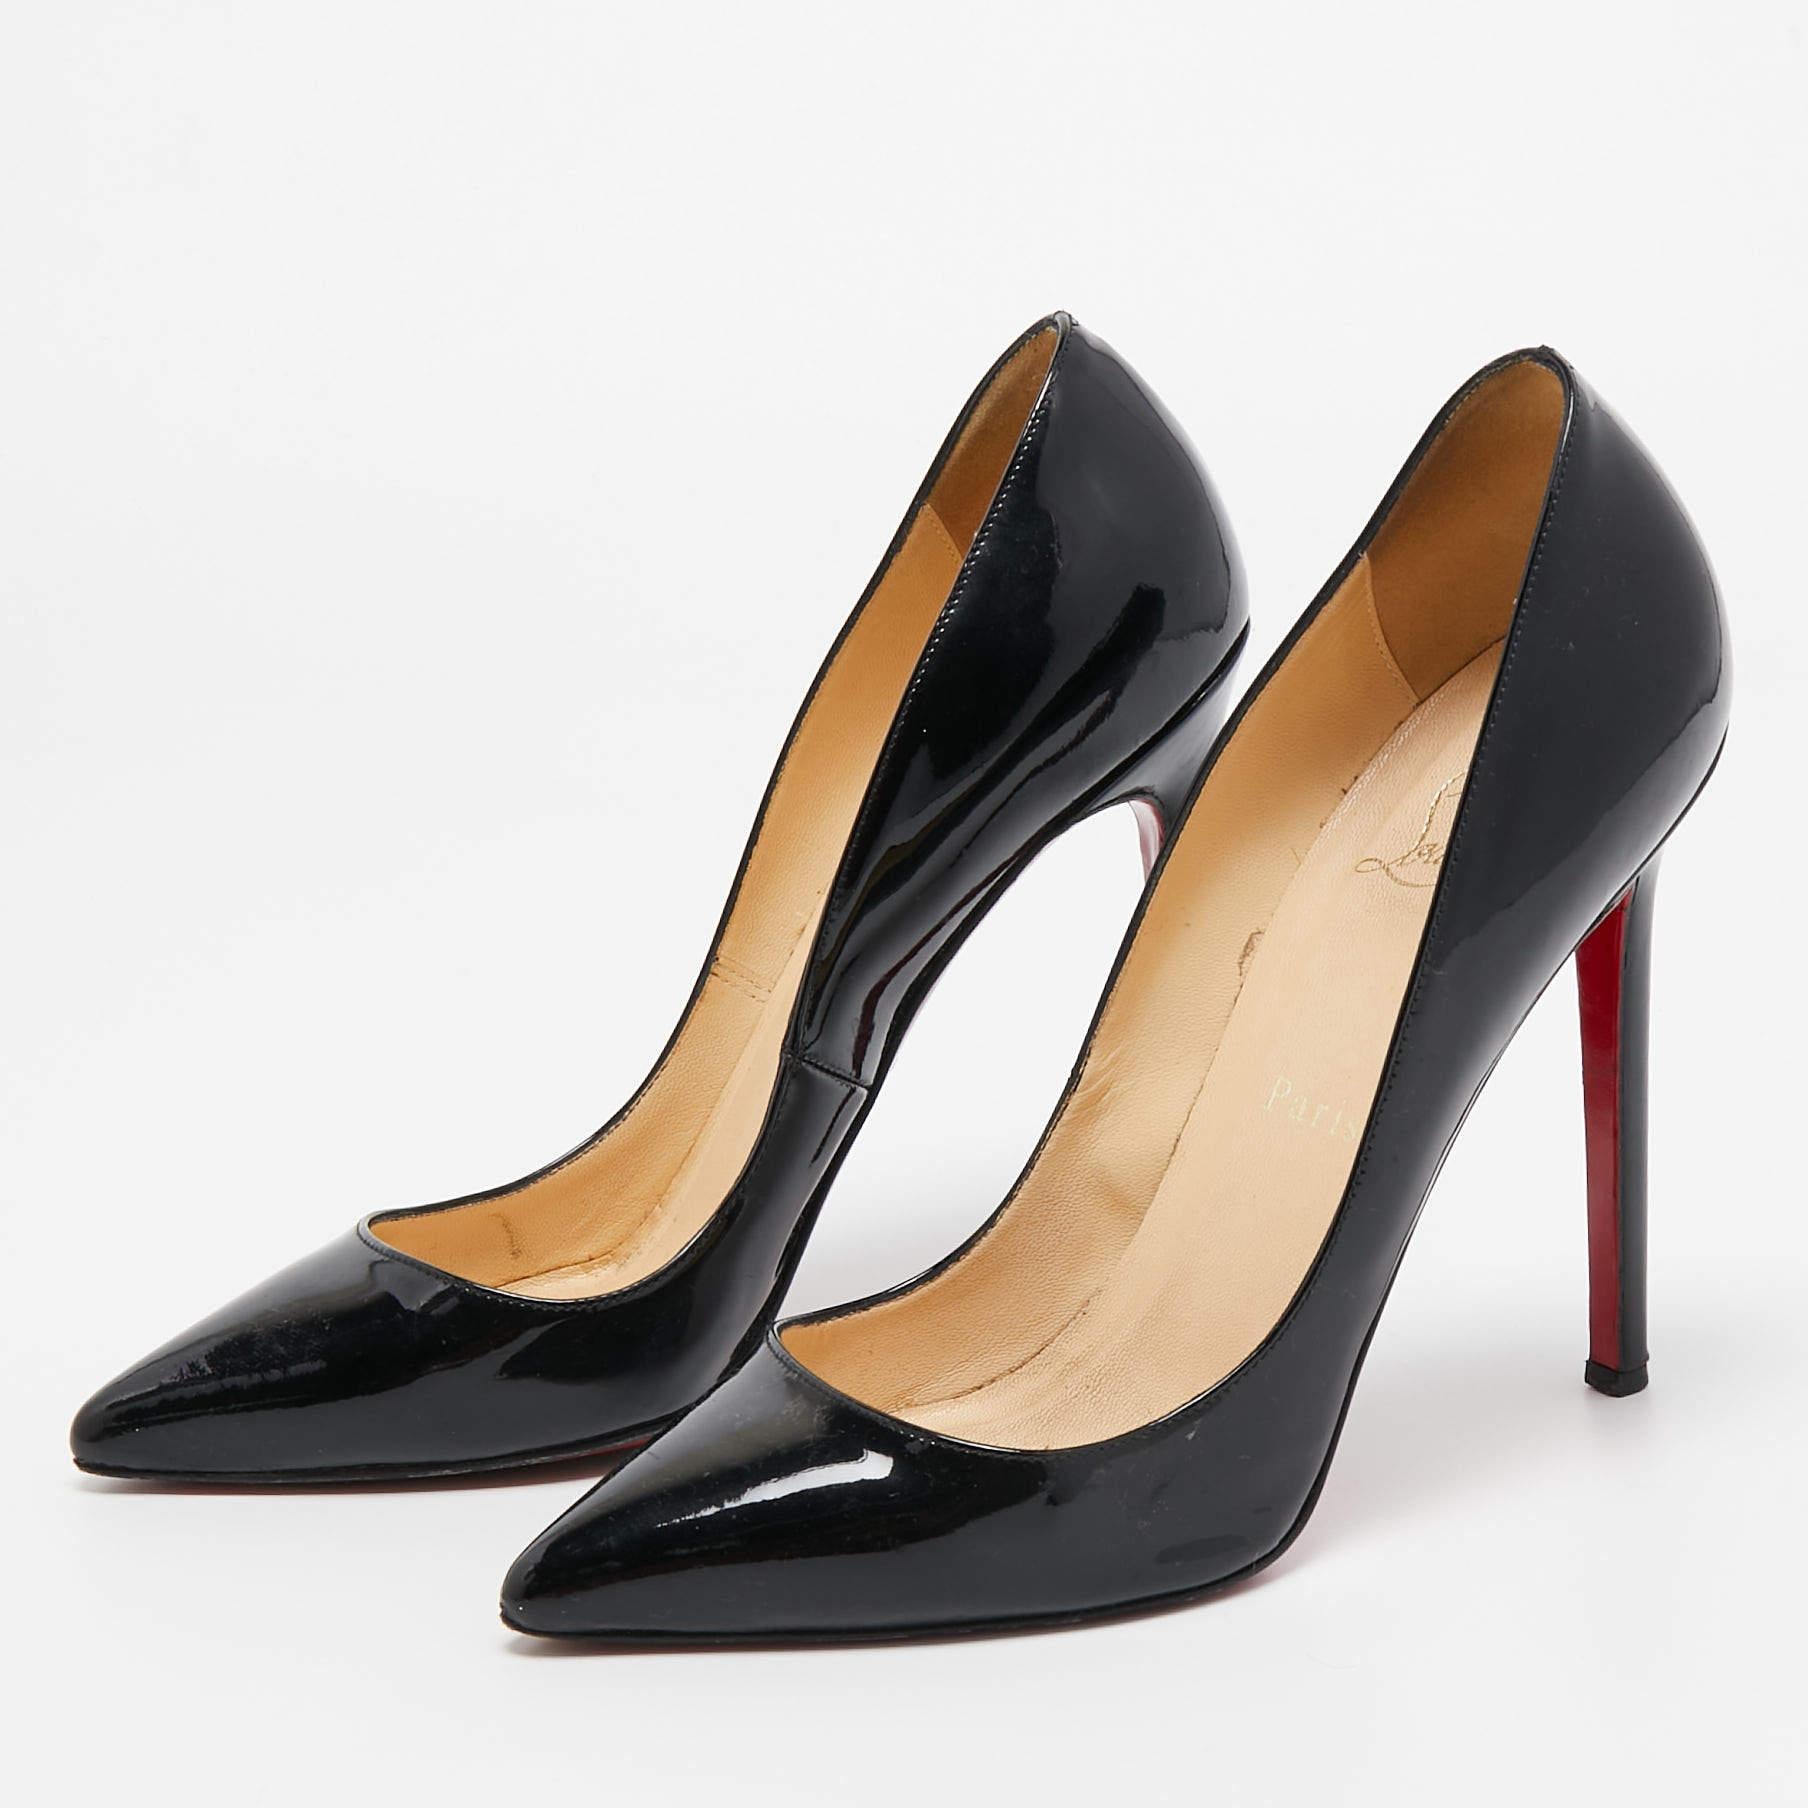 Christian Louboutin Black Pigalle Pointed Toe Pumps Size 37 In Good Condition For Sale In Dubai, Al Qouz 2